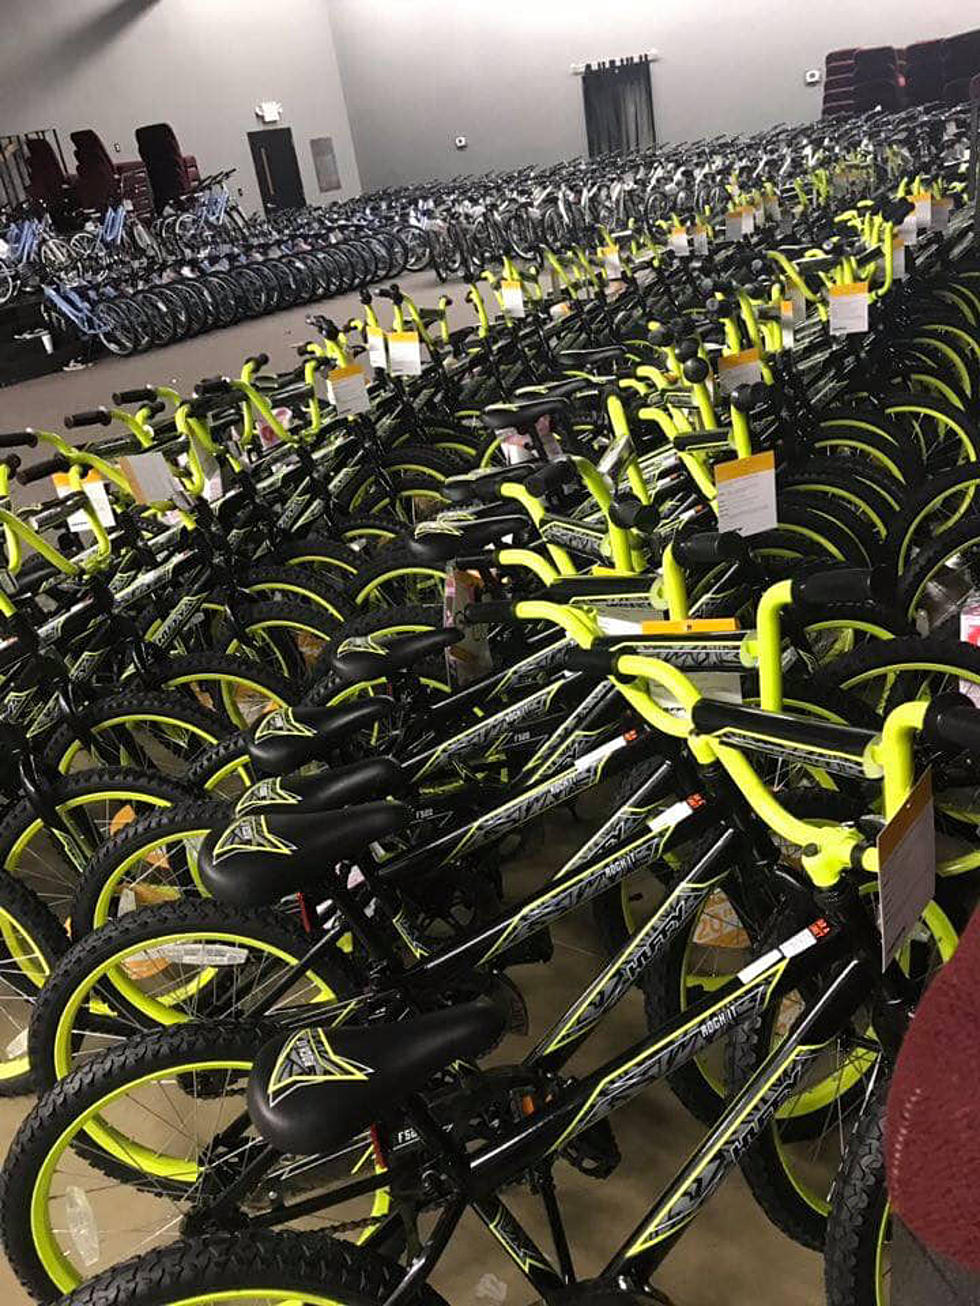 Local Church Is Giving Away 500 Bicycles, For Real